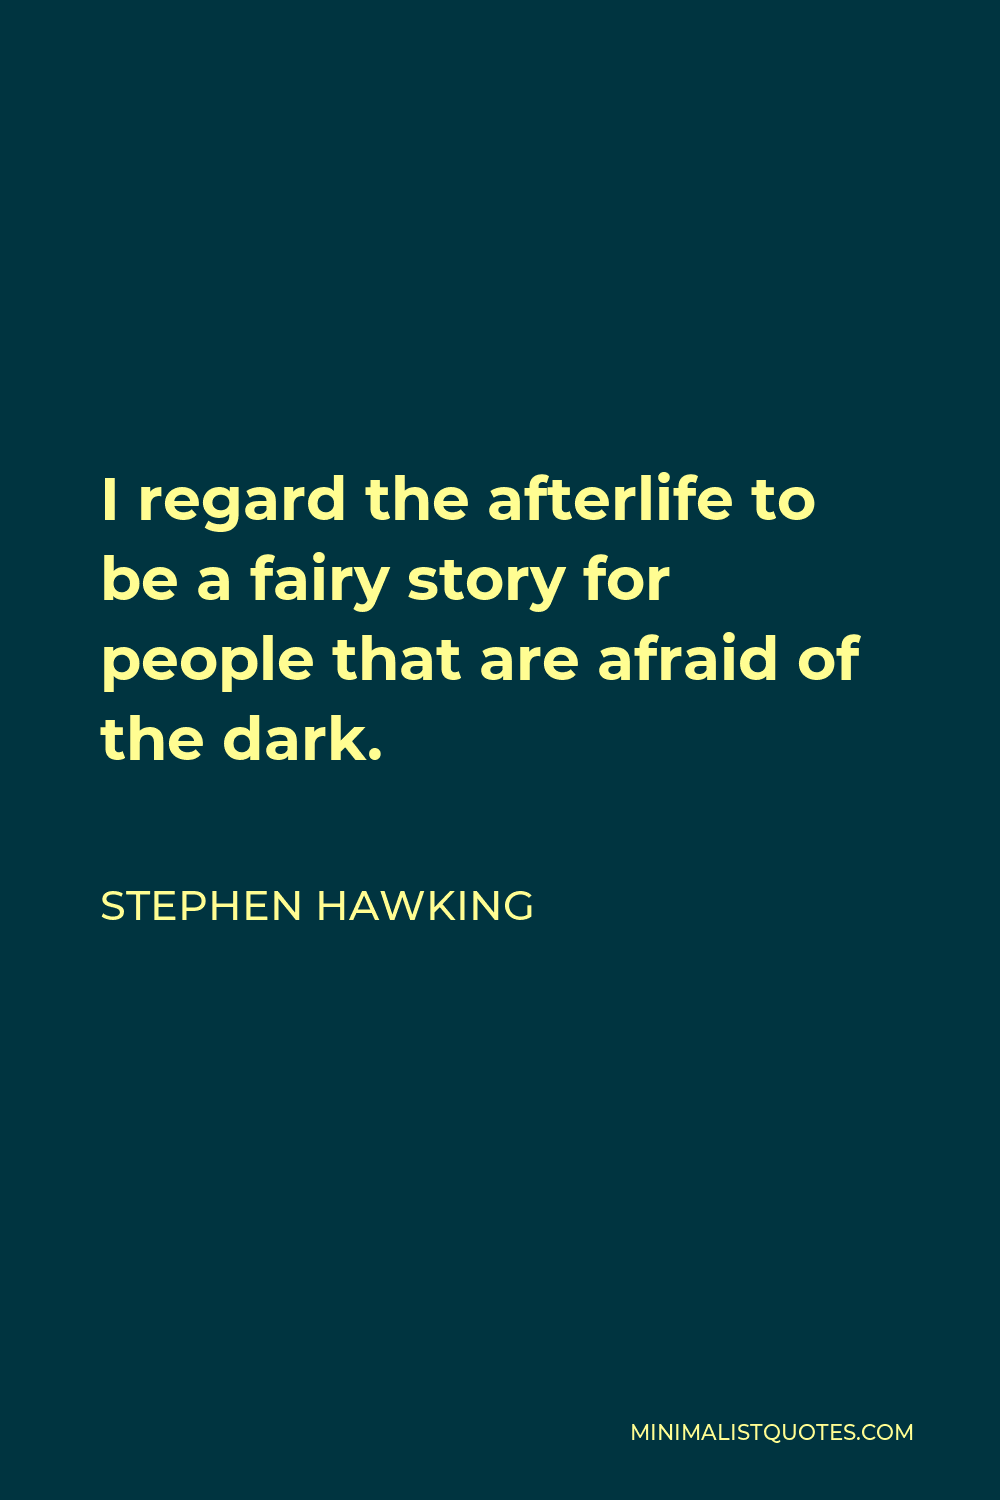 Stephen Hawking Quote - I regard the afterlife to be a fairy story for people that are afraid of the dark.